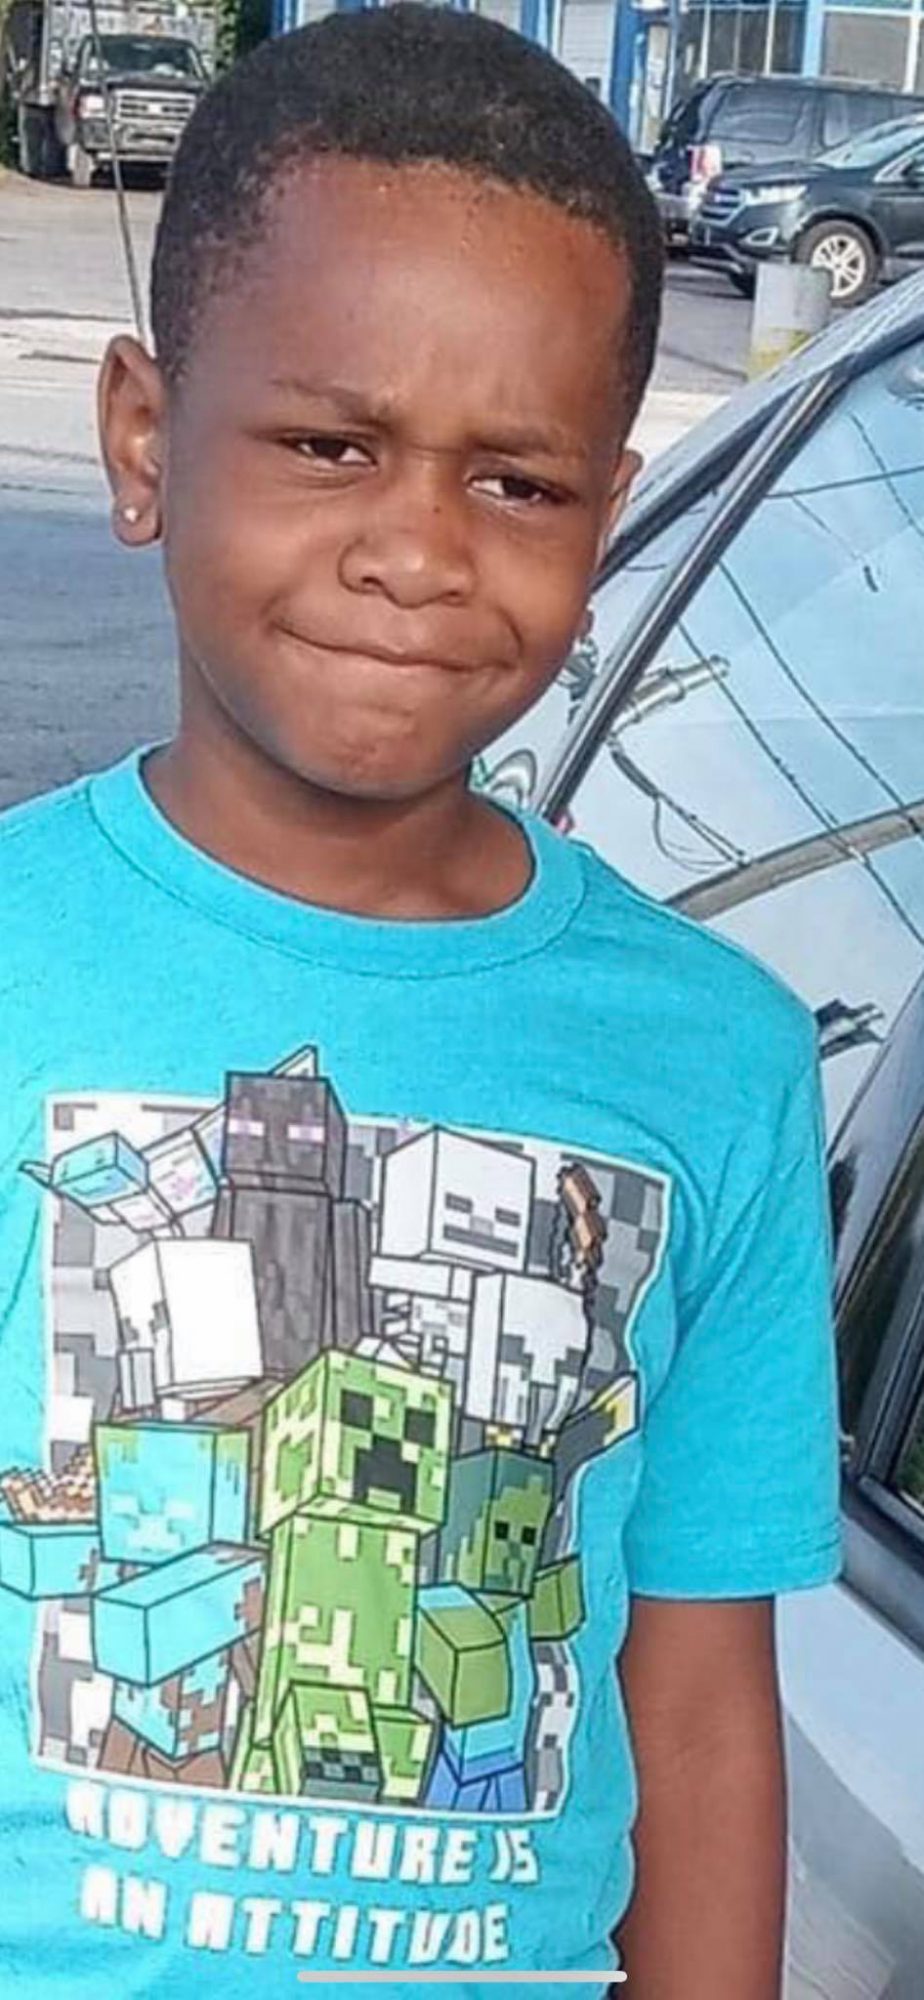 An 8-year-old boy is fatally shot while playing on the porch of his home when assailants shoot a man in the yard